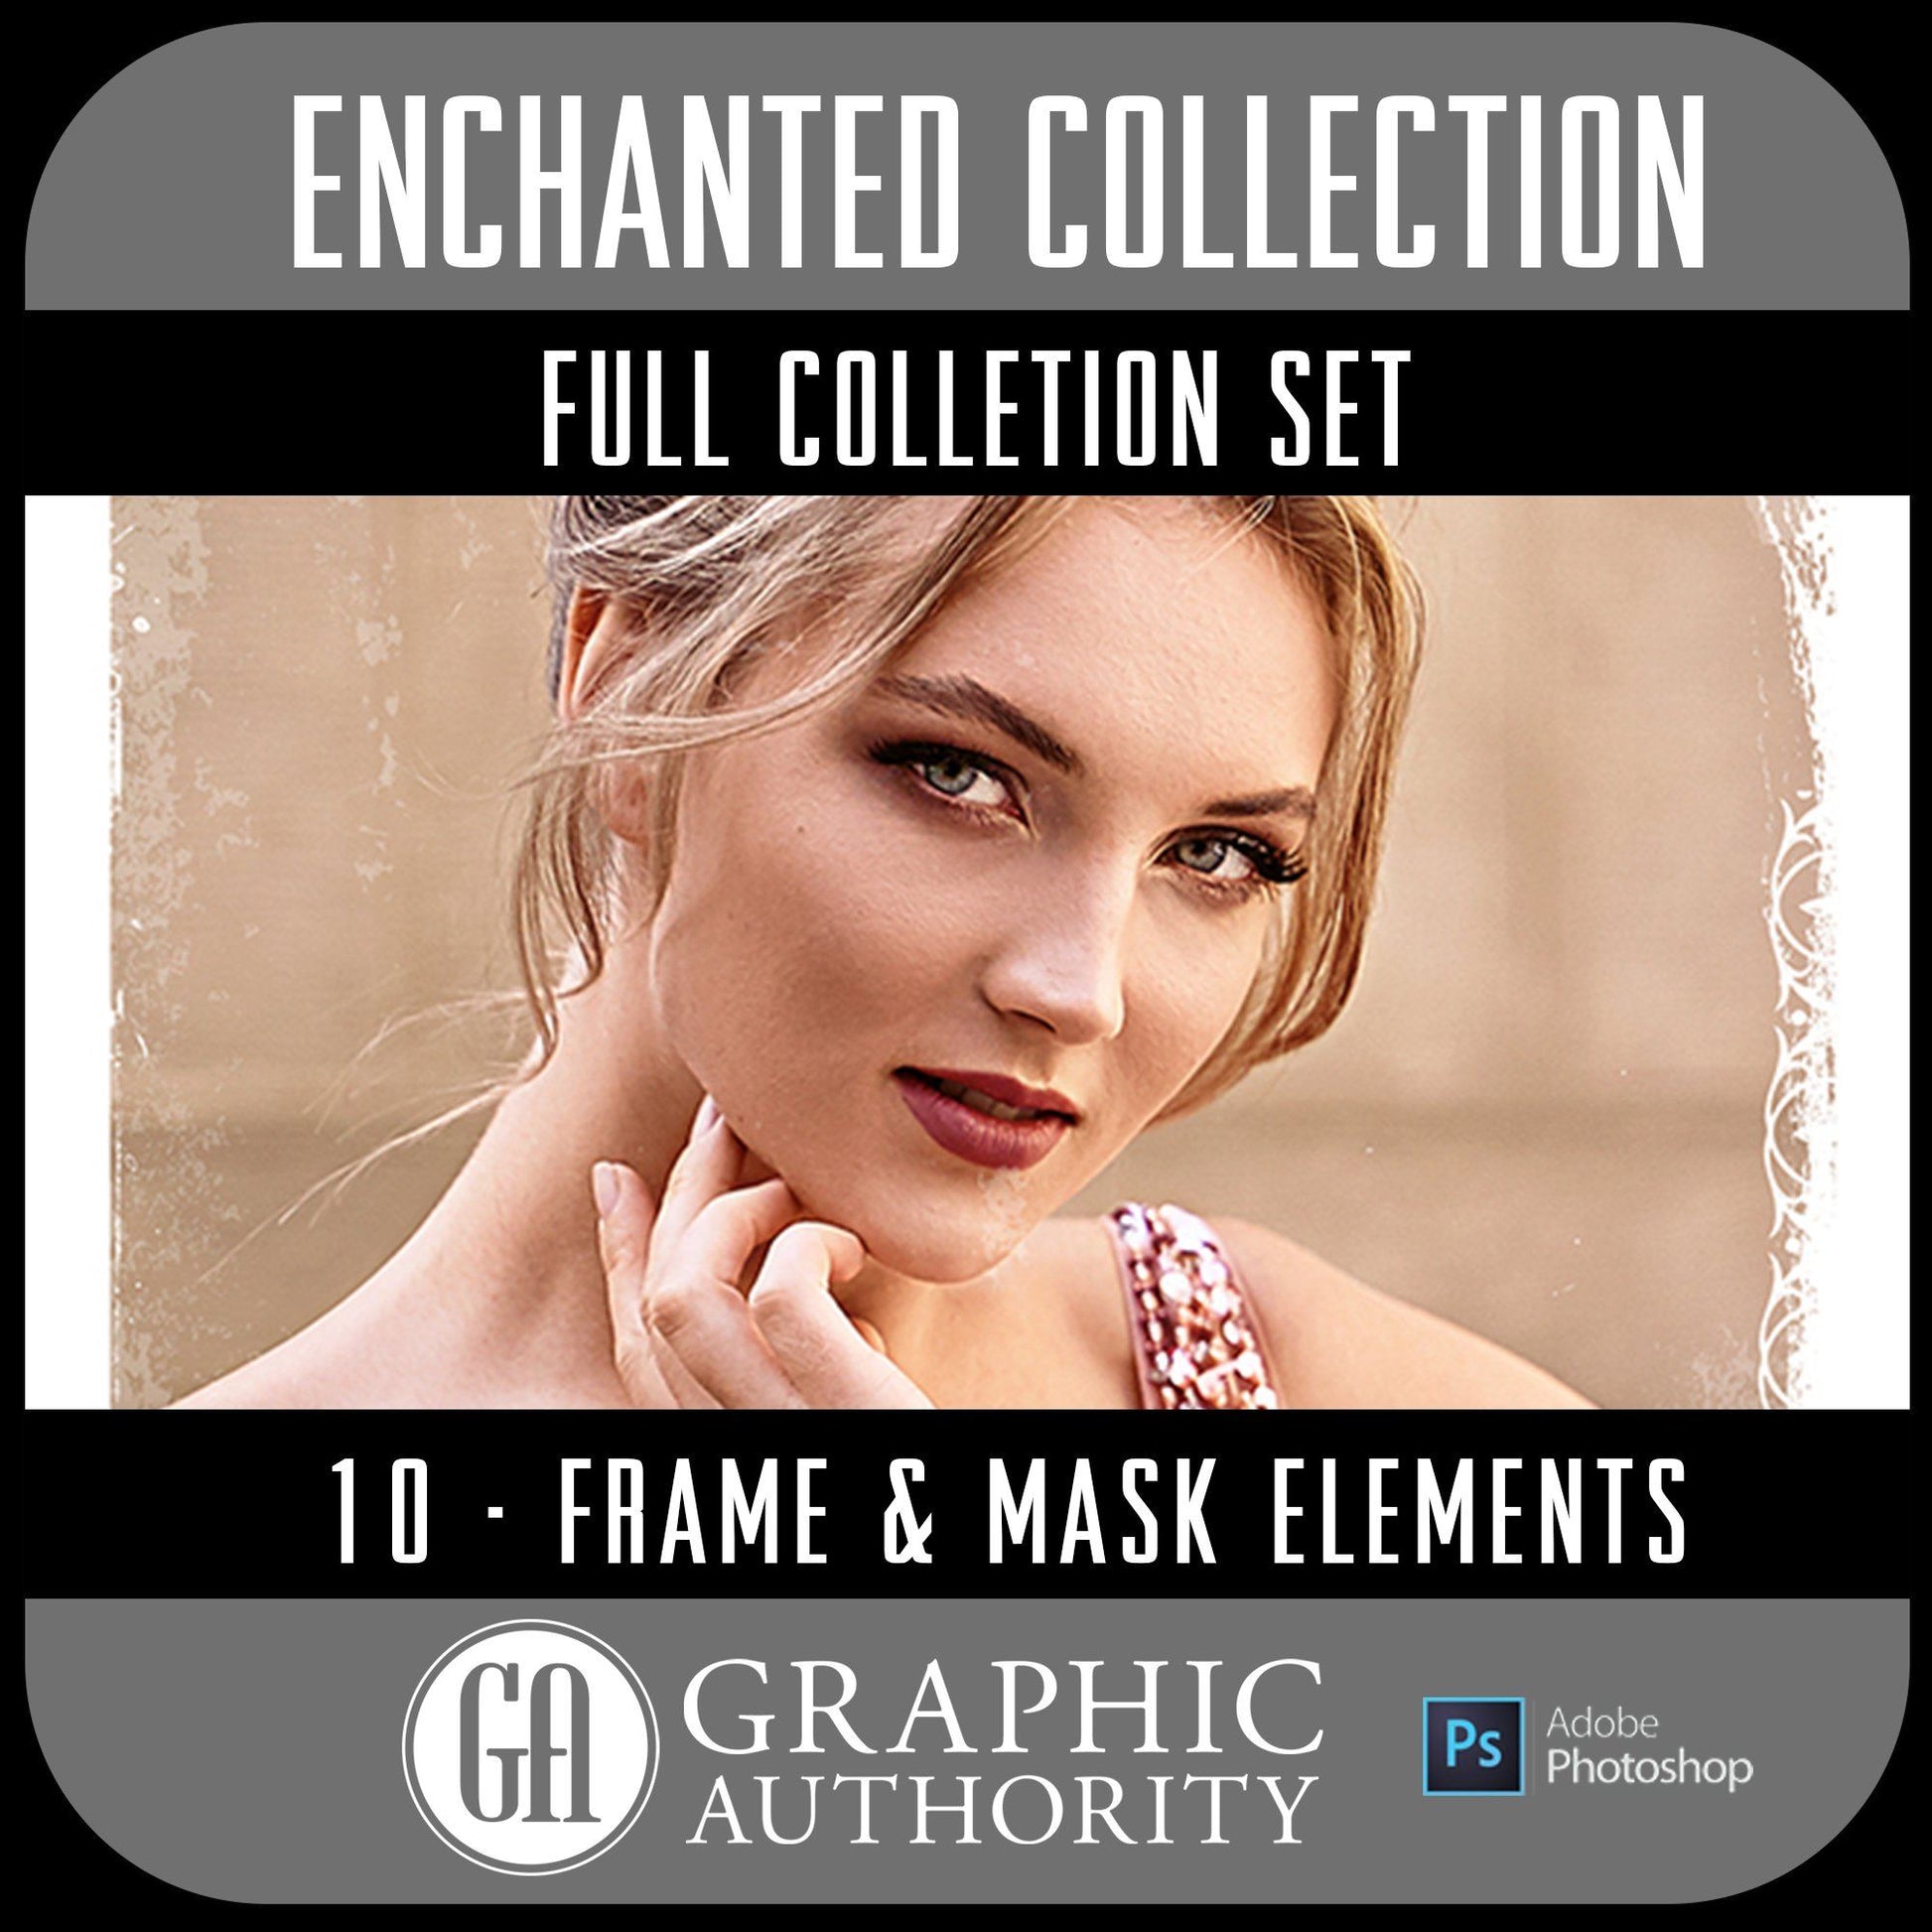 Enchanted Collection - Full Set- 10 Frames & Masks-Photoshop Template - Graphic Authority